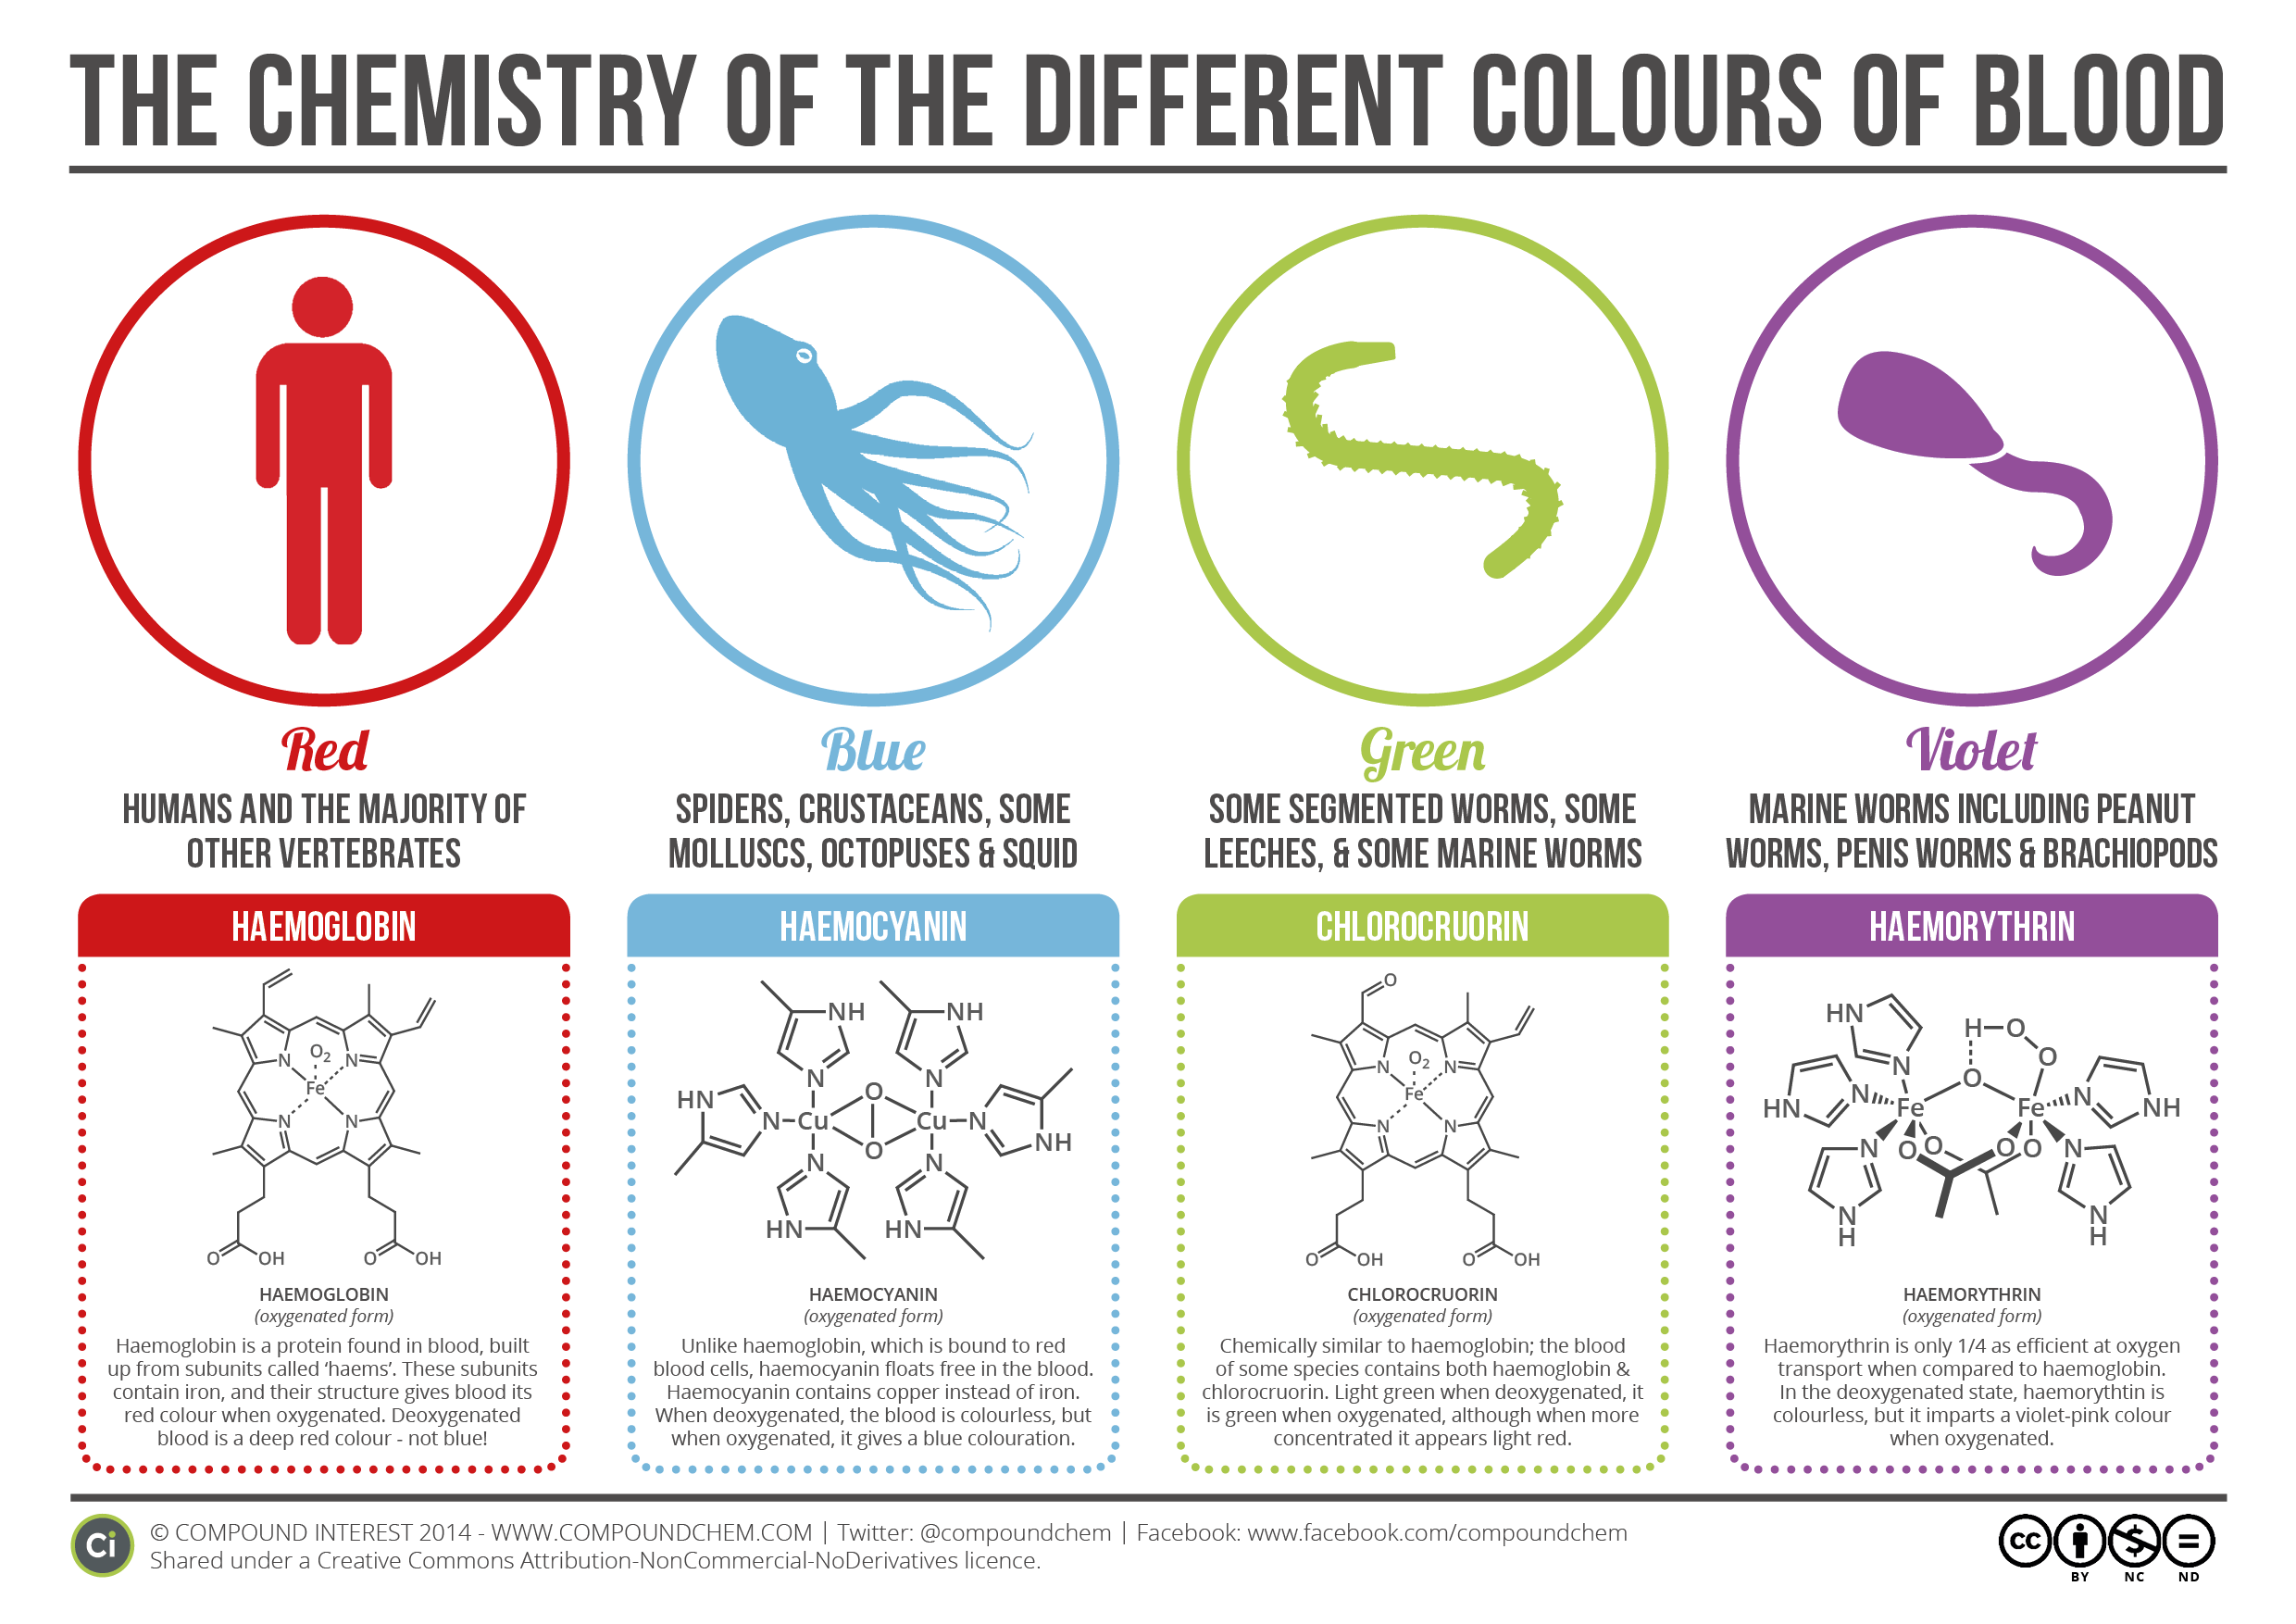 Purple Blue Green Red Logo - The Chemistry of The Colours of Blood | Compound Interest